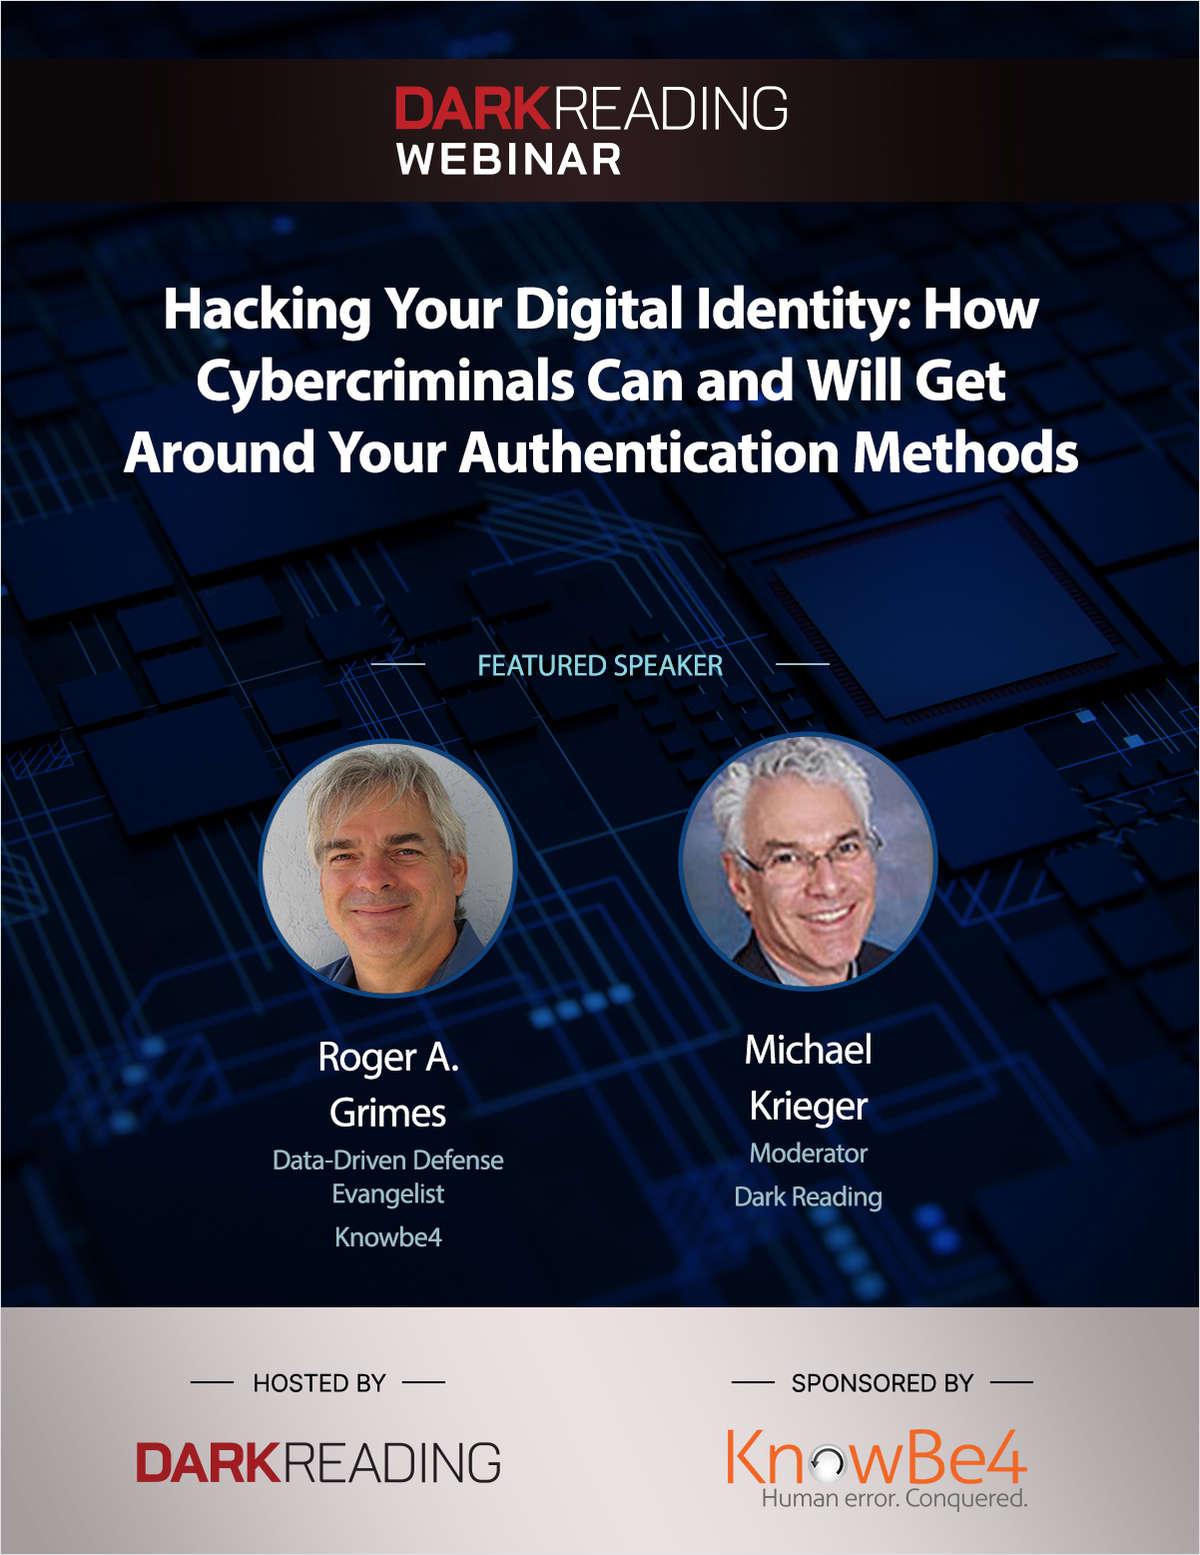 Hacking Your Digital Identity: How Cybercriminals Can and Will Get Around Your Authentication Methods